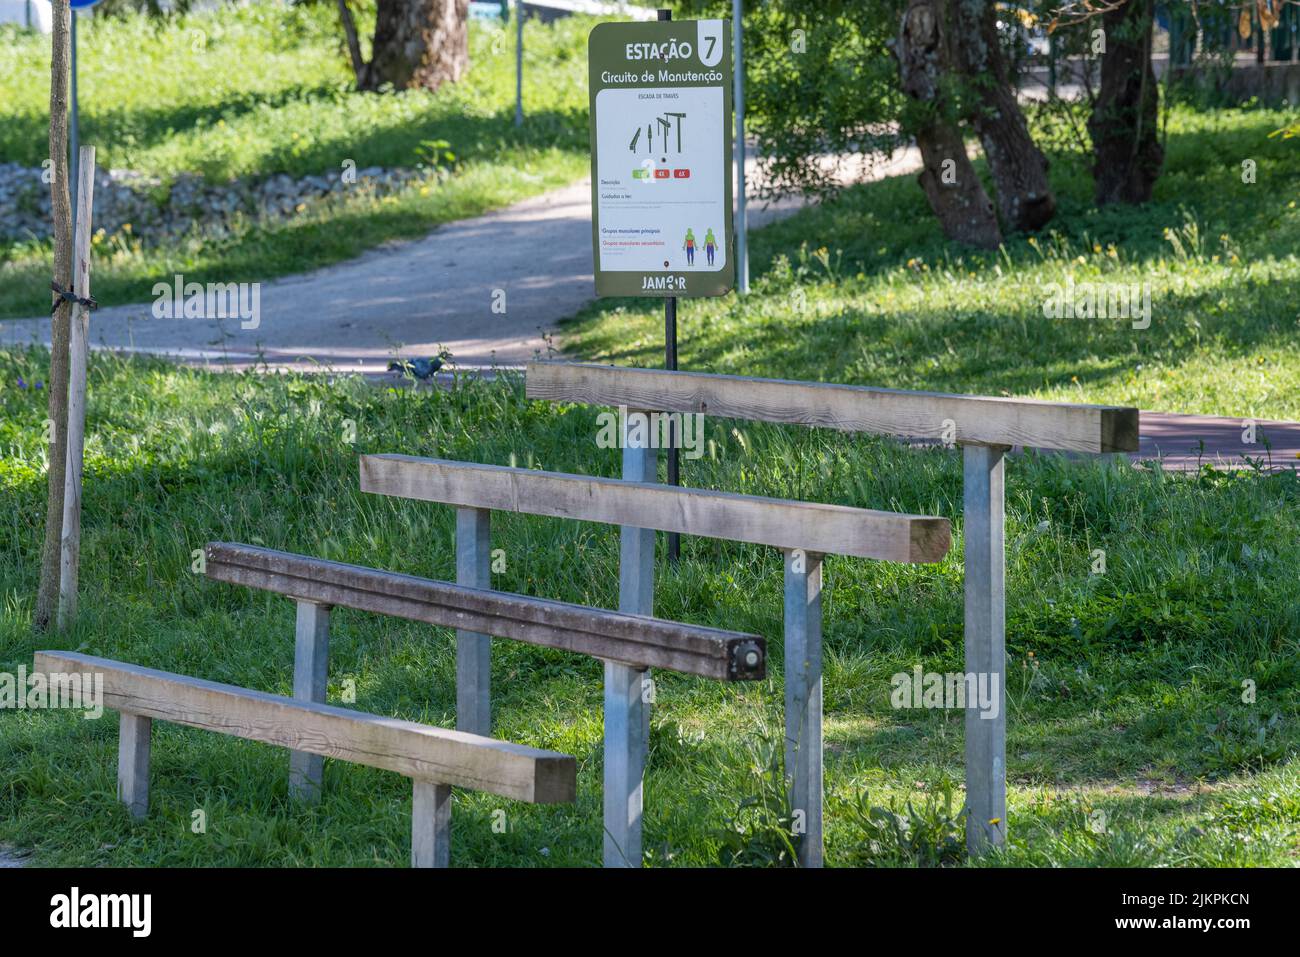 A maintenance circuit space in the Jamor Urban Park in Lisbon Stock Photo